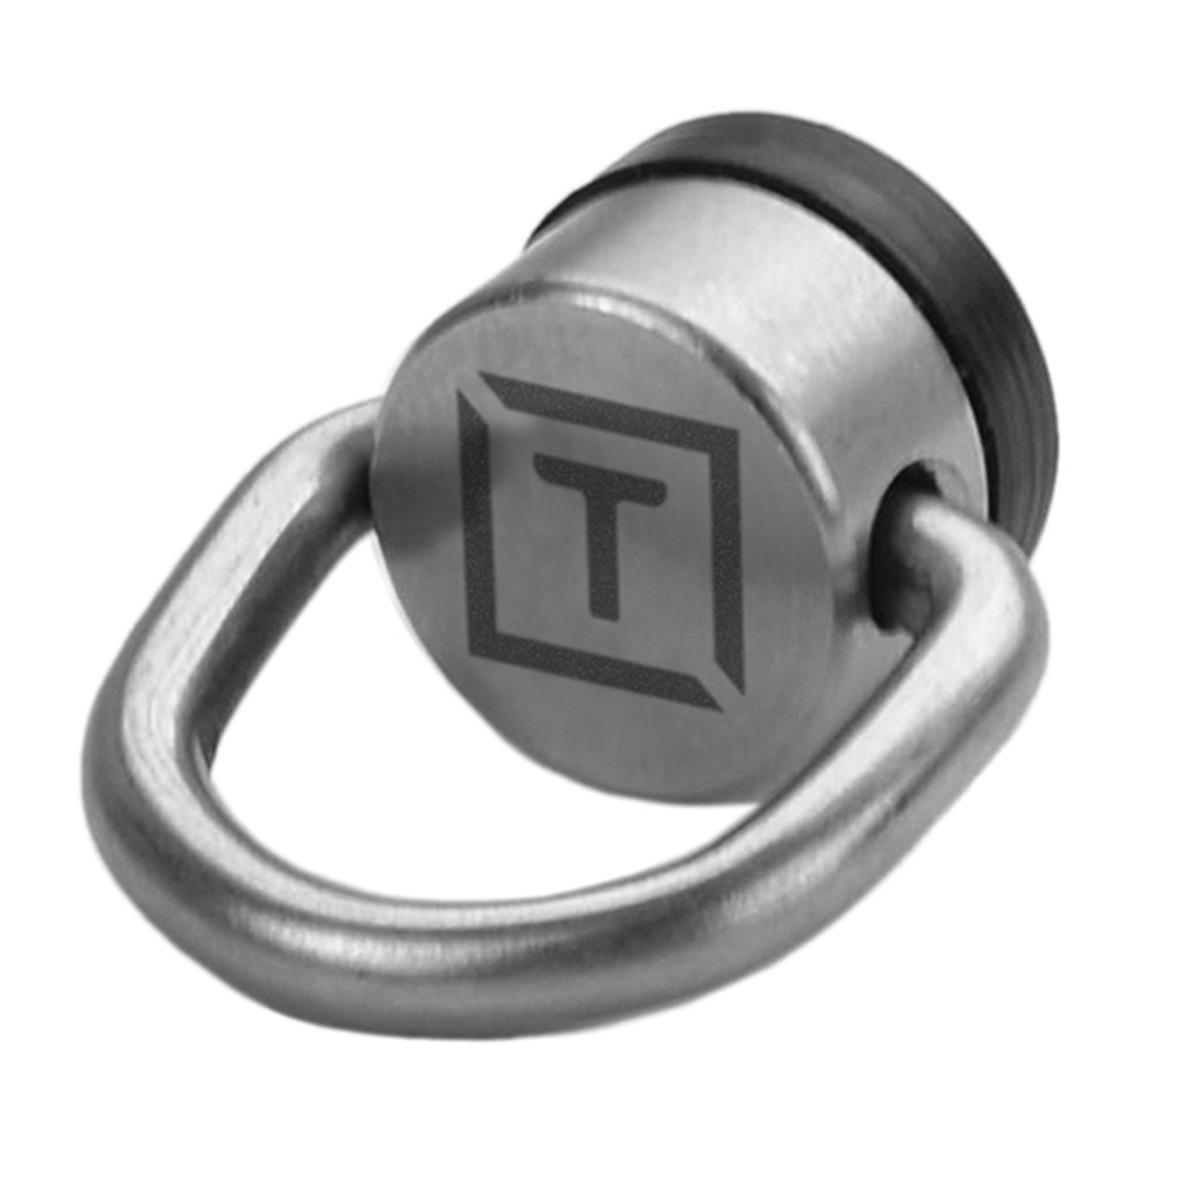 Image of Tether Tools Hitch D-Ring for Use with X Lock Connect Lite